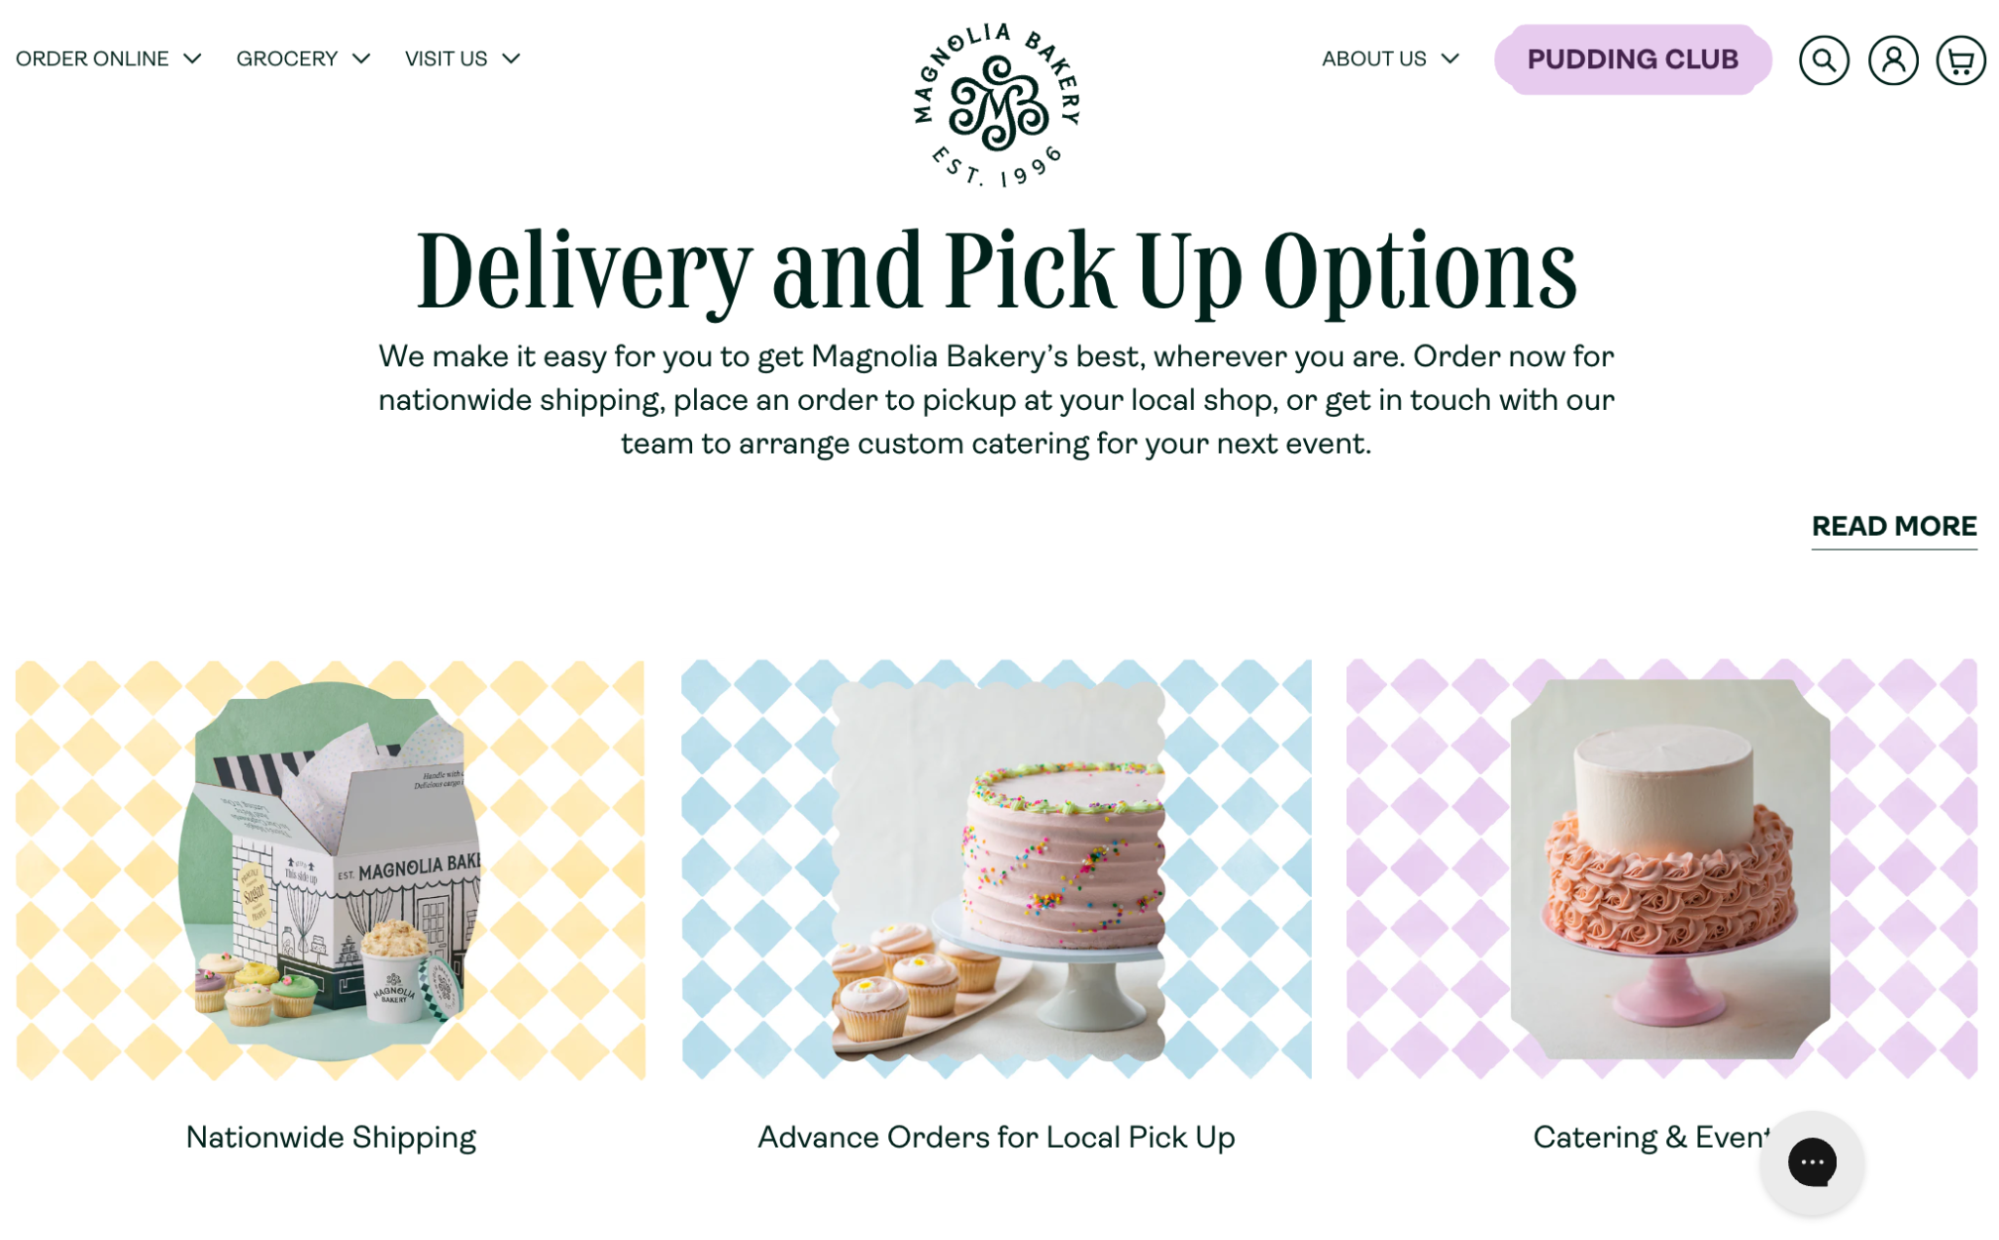 Magnolia Bakery’s landing page, showing its delivery and pickup options.